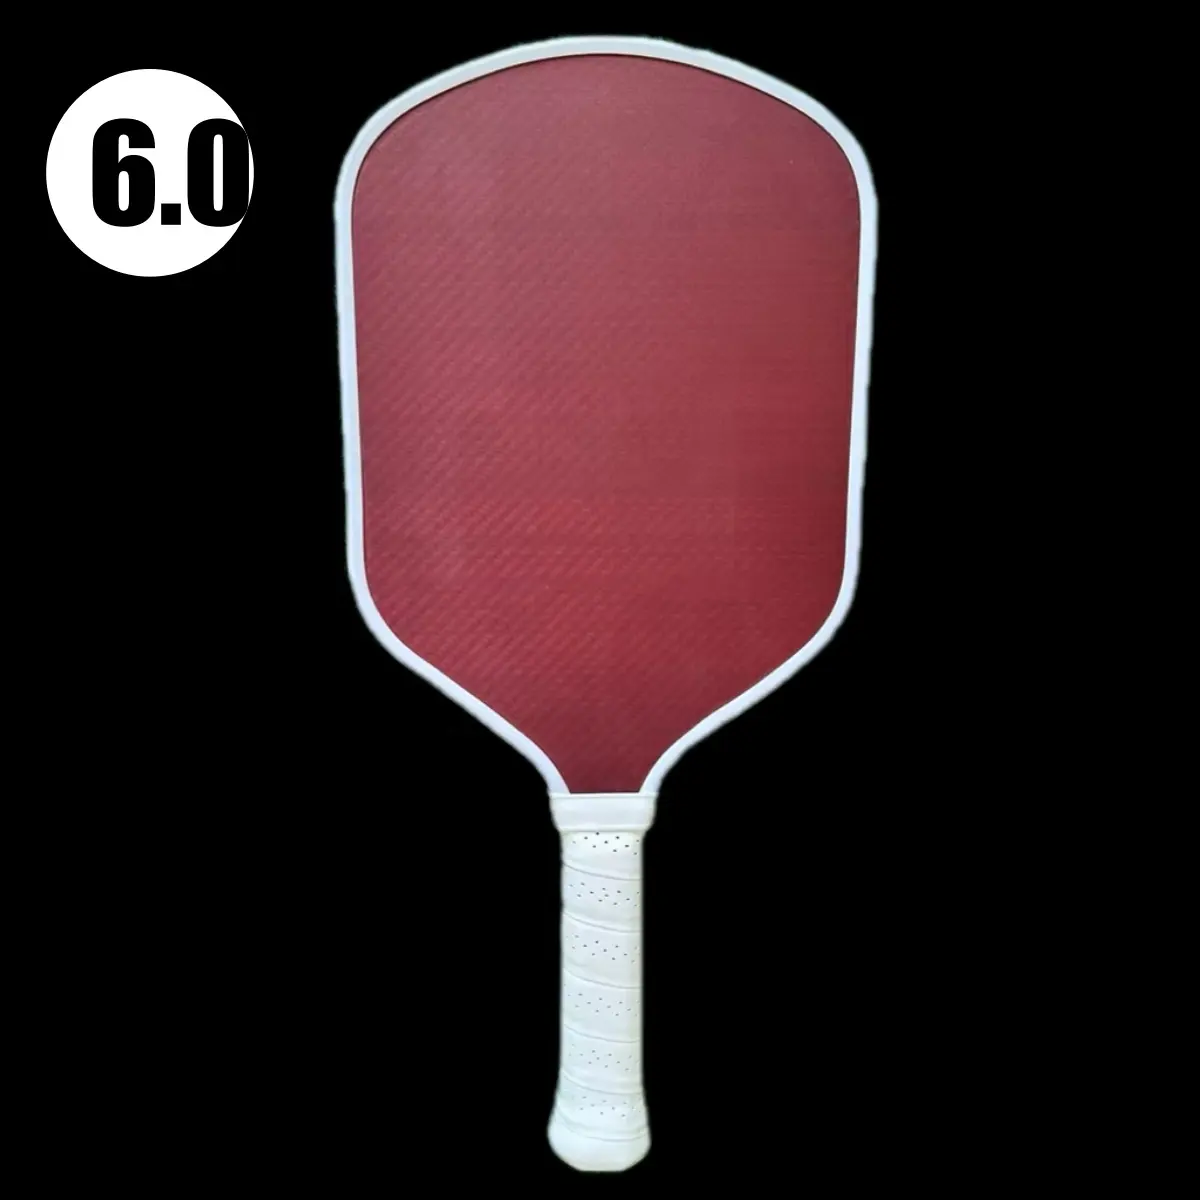 Go Next Level Ruby Flared Design Thermoformed T700 Unibody Mold Foam Injected Wall Professional Quality Pickleball Paddle USAPA